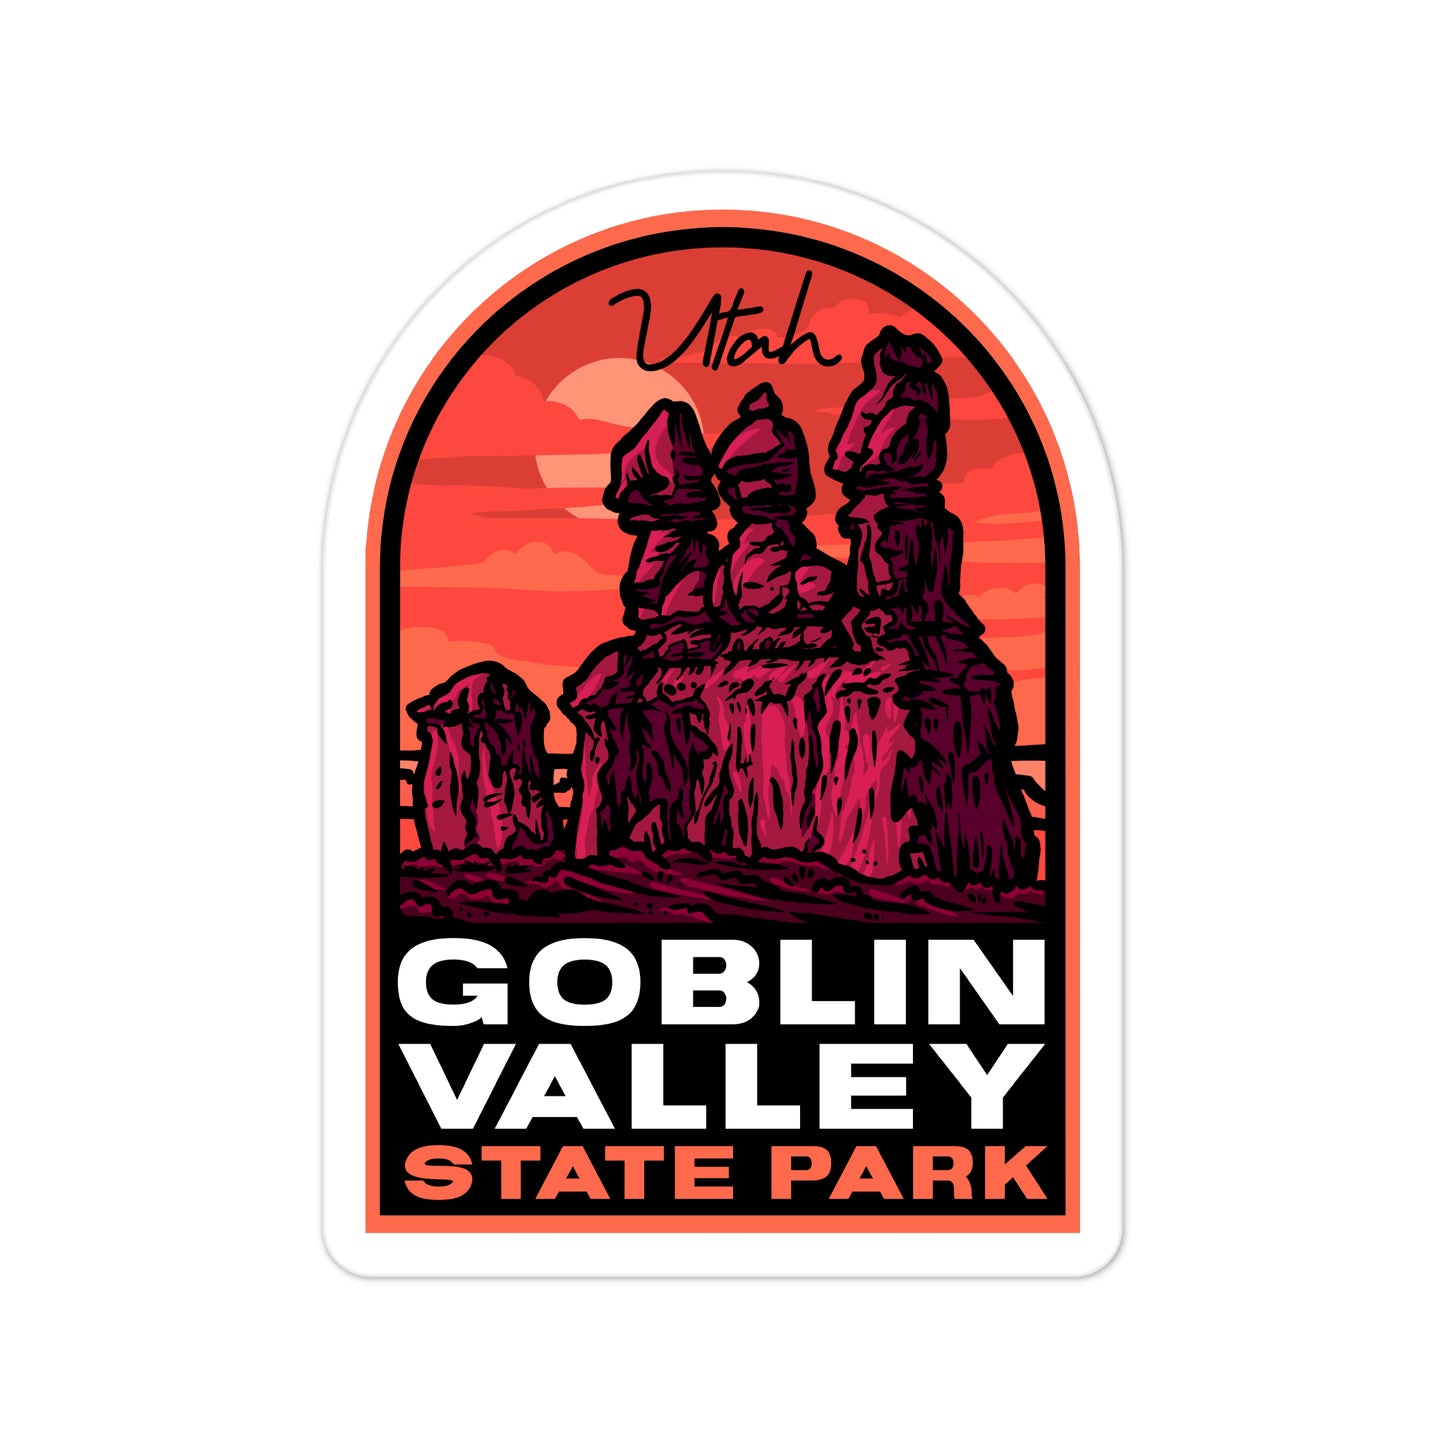 A sticker of Goblin Valley State Park